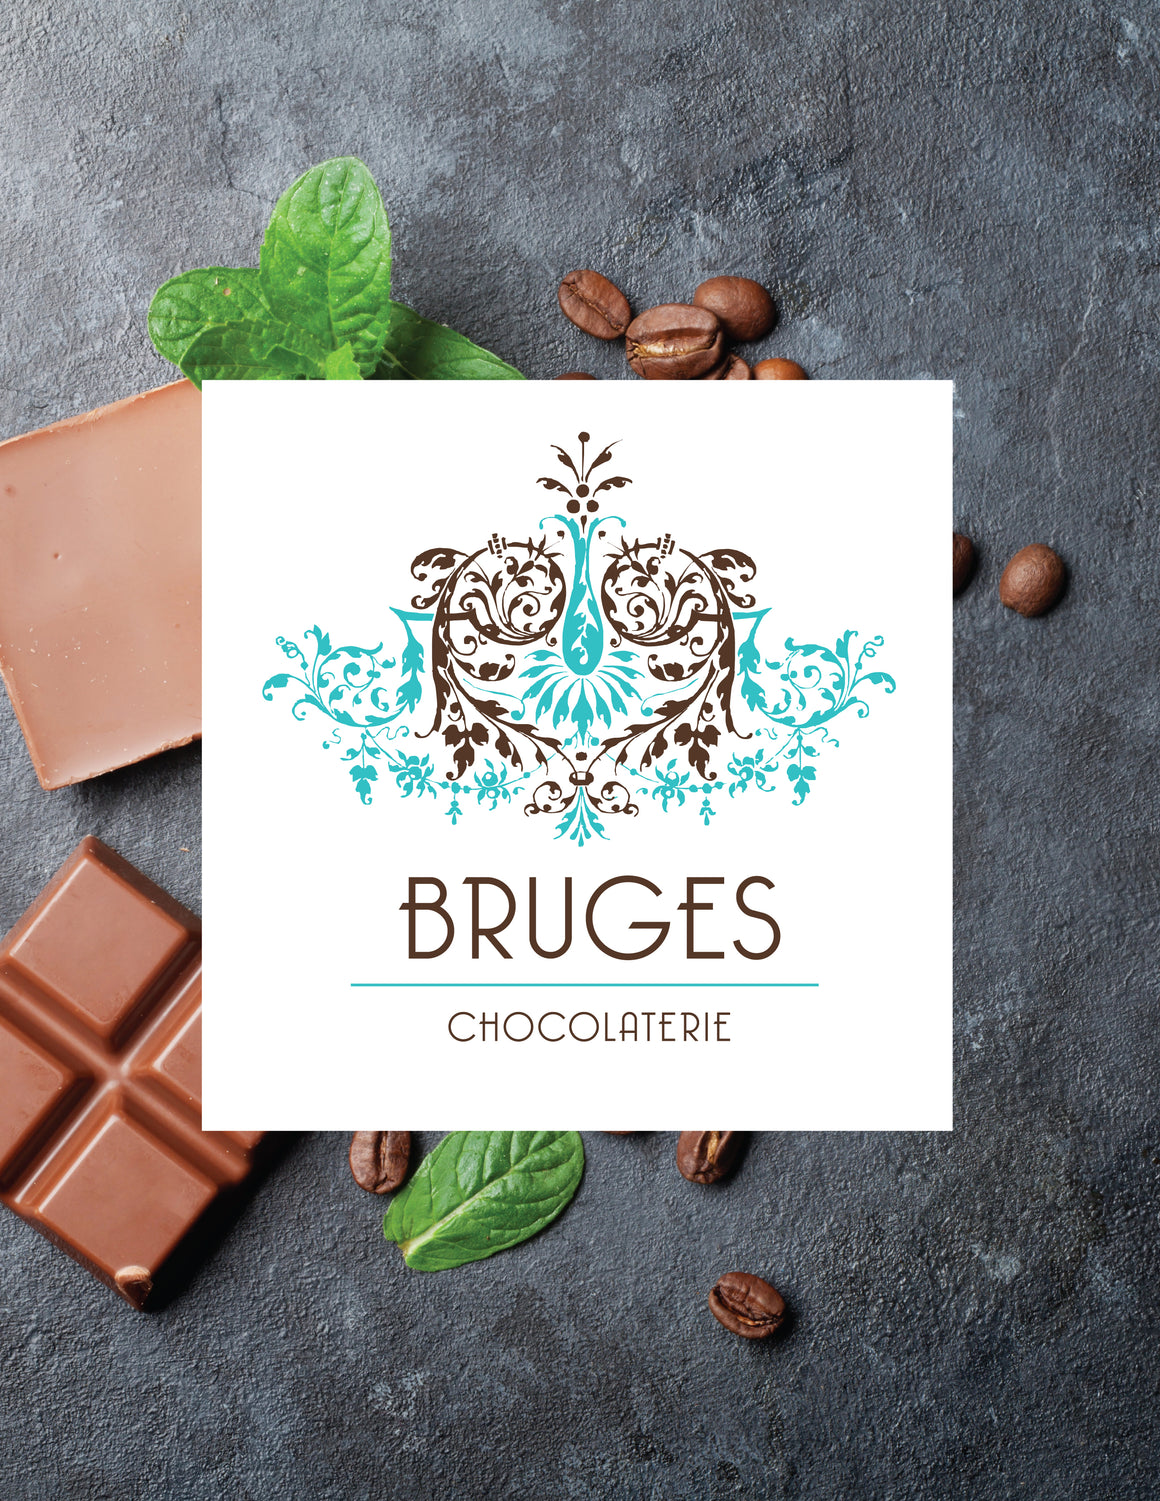 Bruges Chocolate Catalog provides customers with the perfect chocolate corporate gift